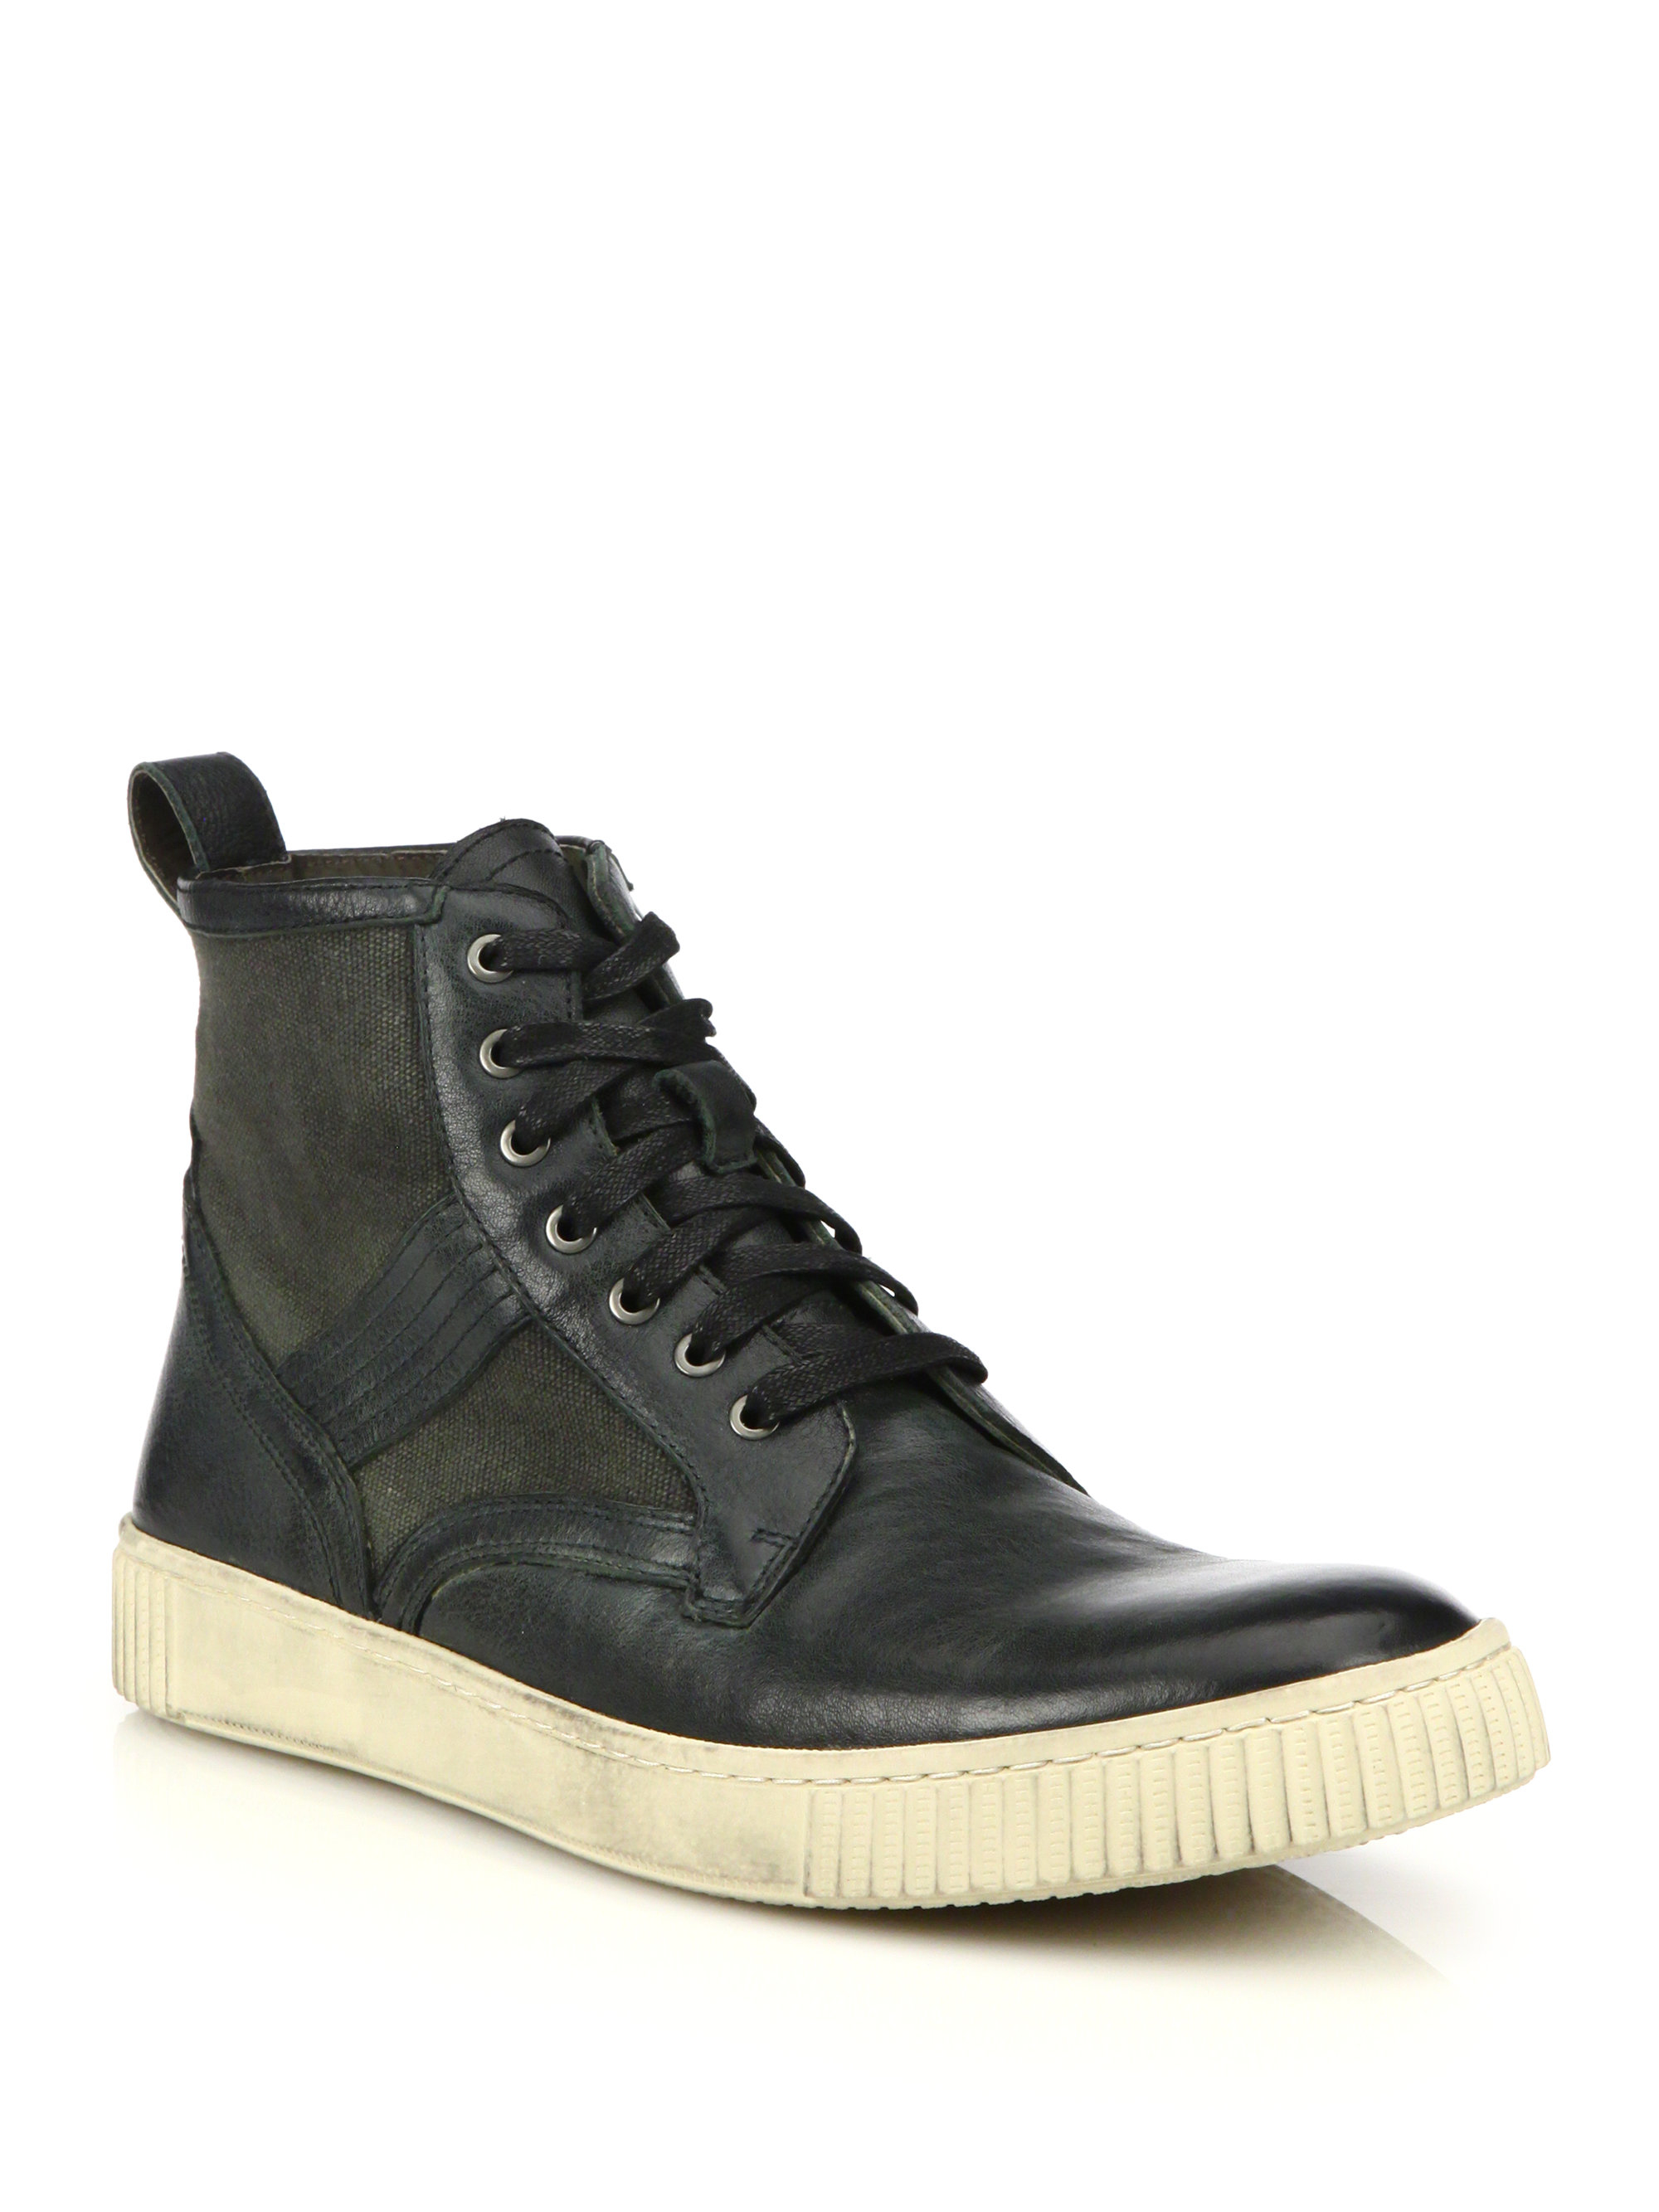 Lyst - John Varvatos Bedford Trooper Leather & Coated Canvas Boots in ...